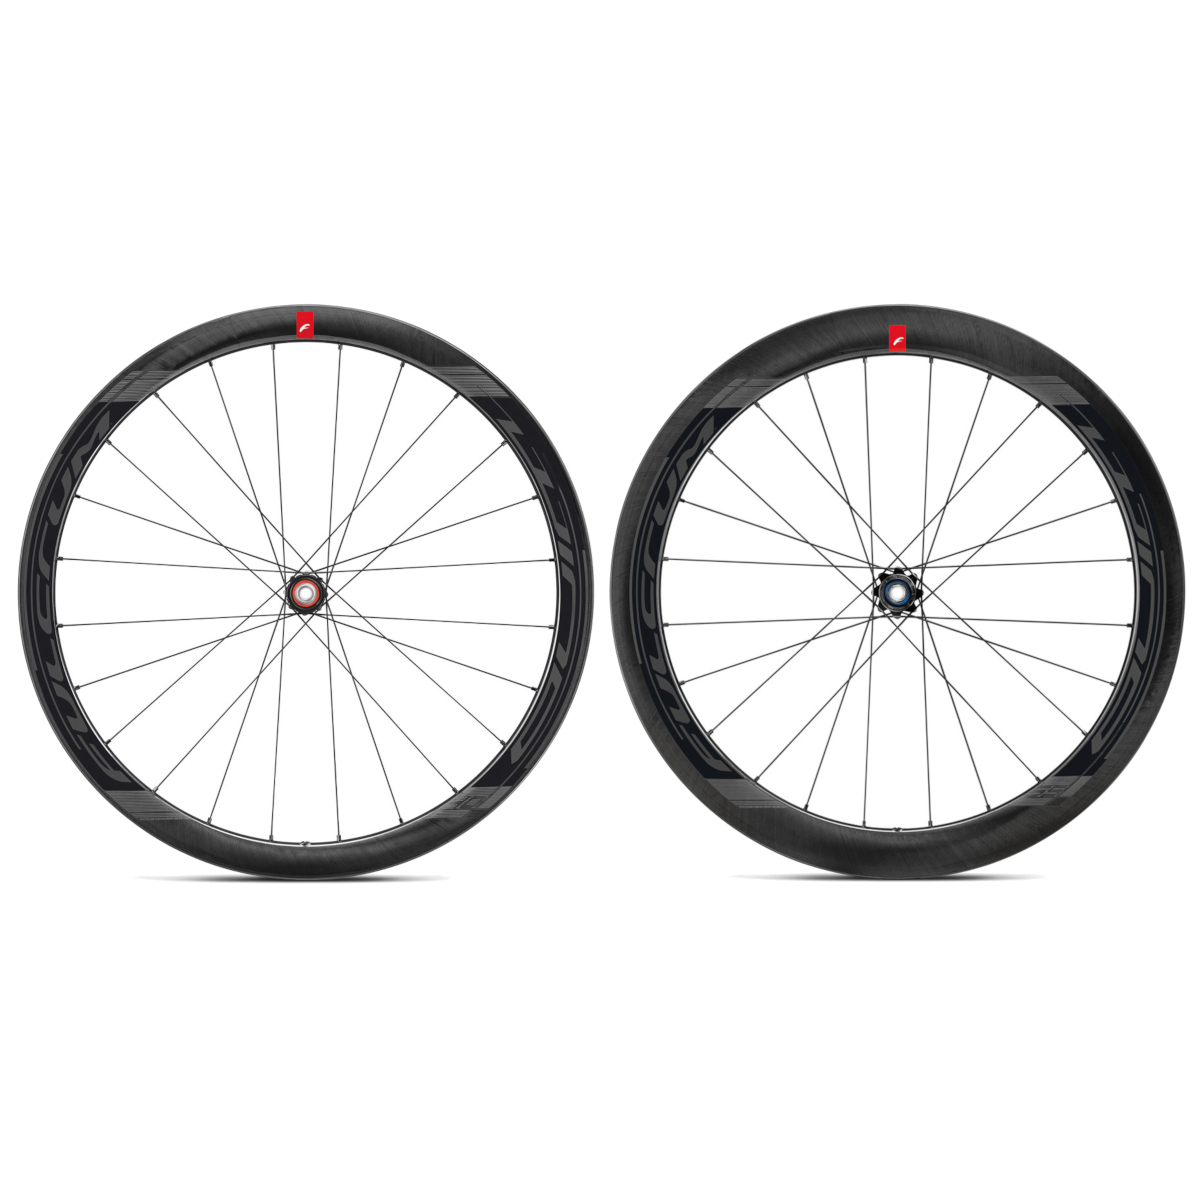 Picture of Fulcrum Wind 40 / 55 DB C19 Carbon Wheelset - Clincher - Centerlock - FW: 12x100mm | RW: 12x142mm - Shimano HG11